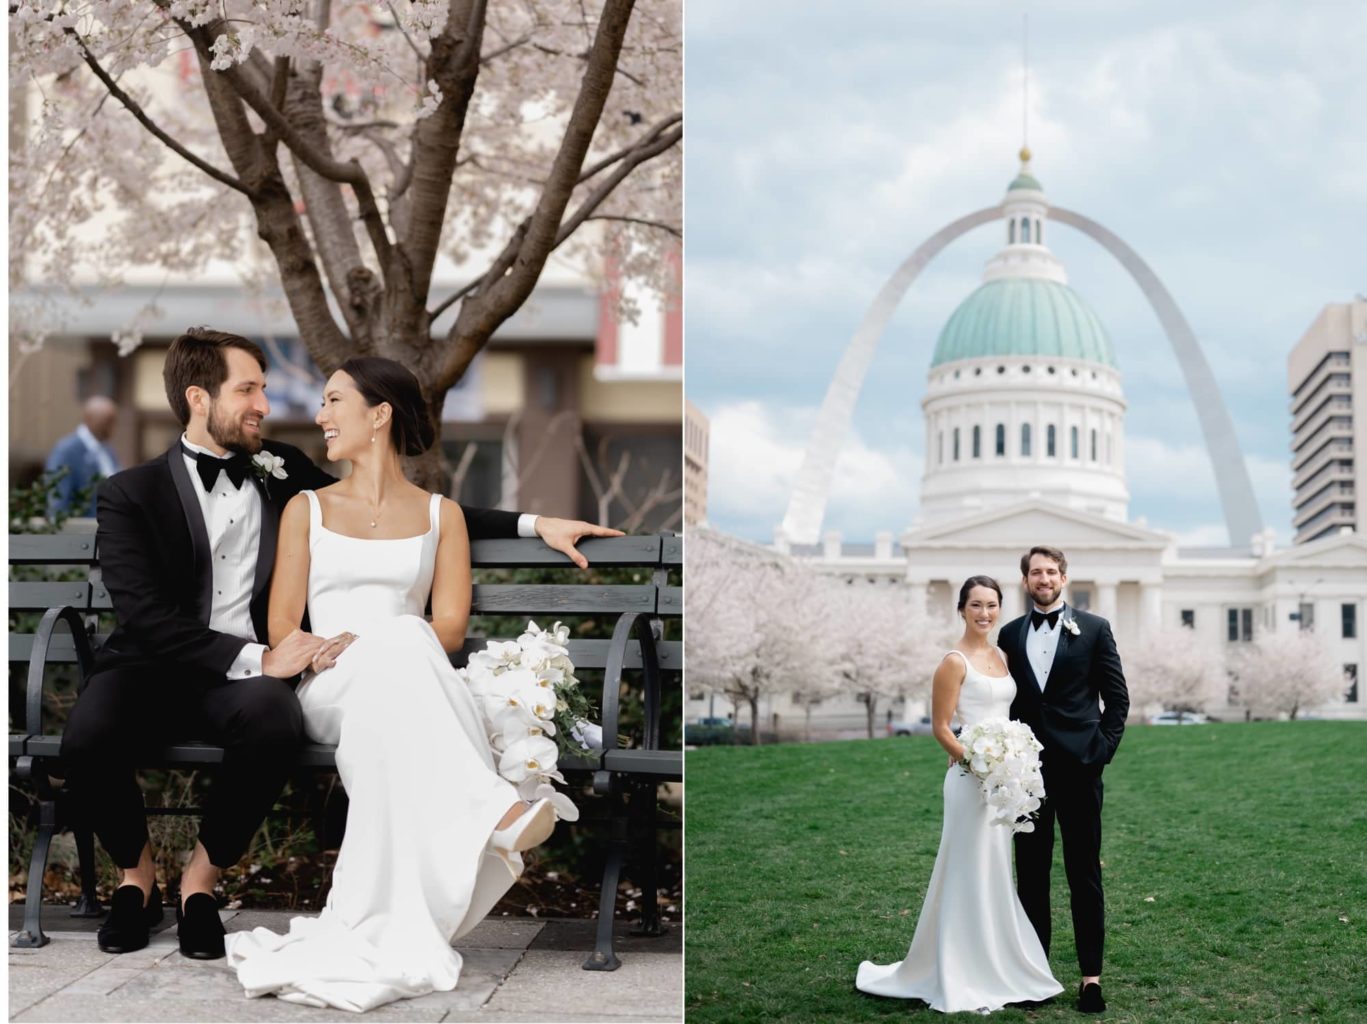 Wedding day portraits in front of the St. Louis old courthouse capital